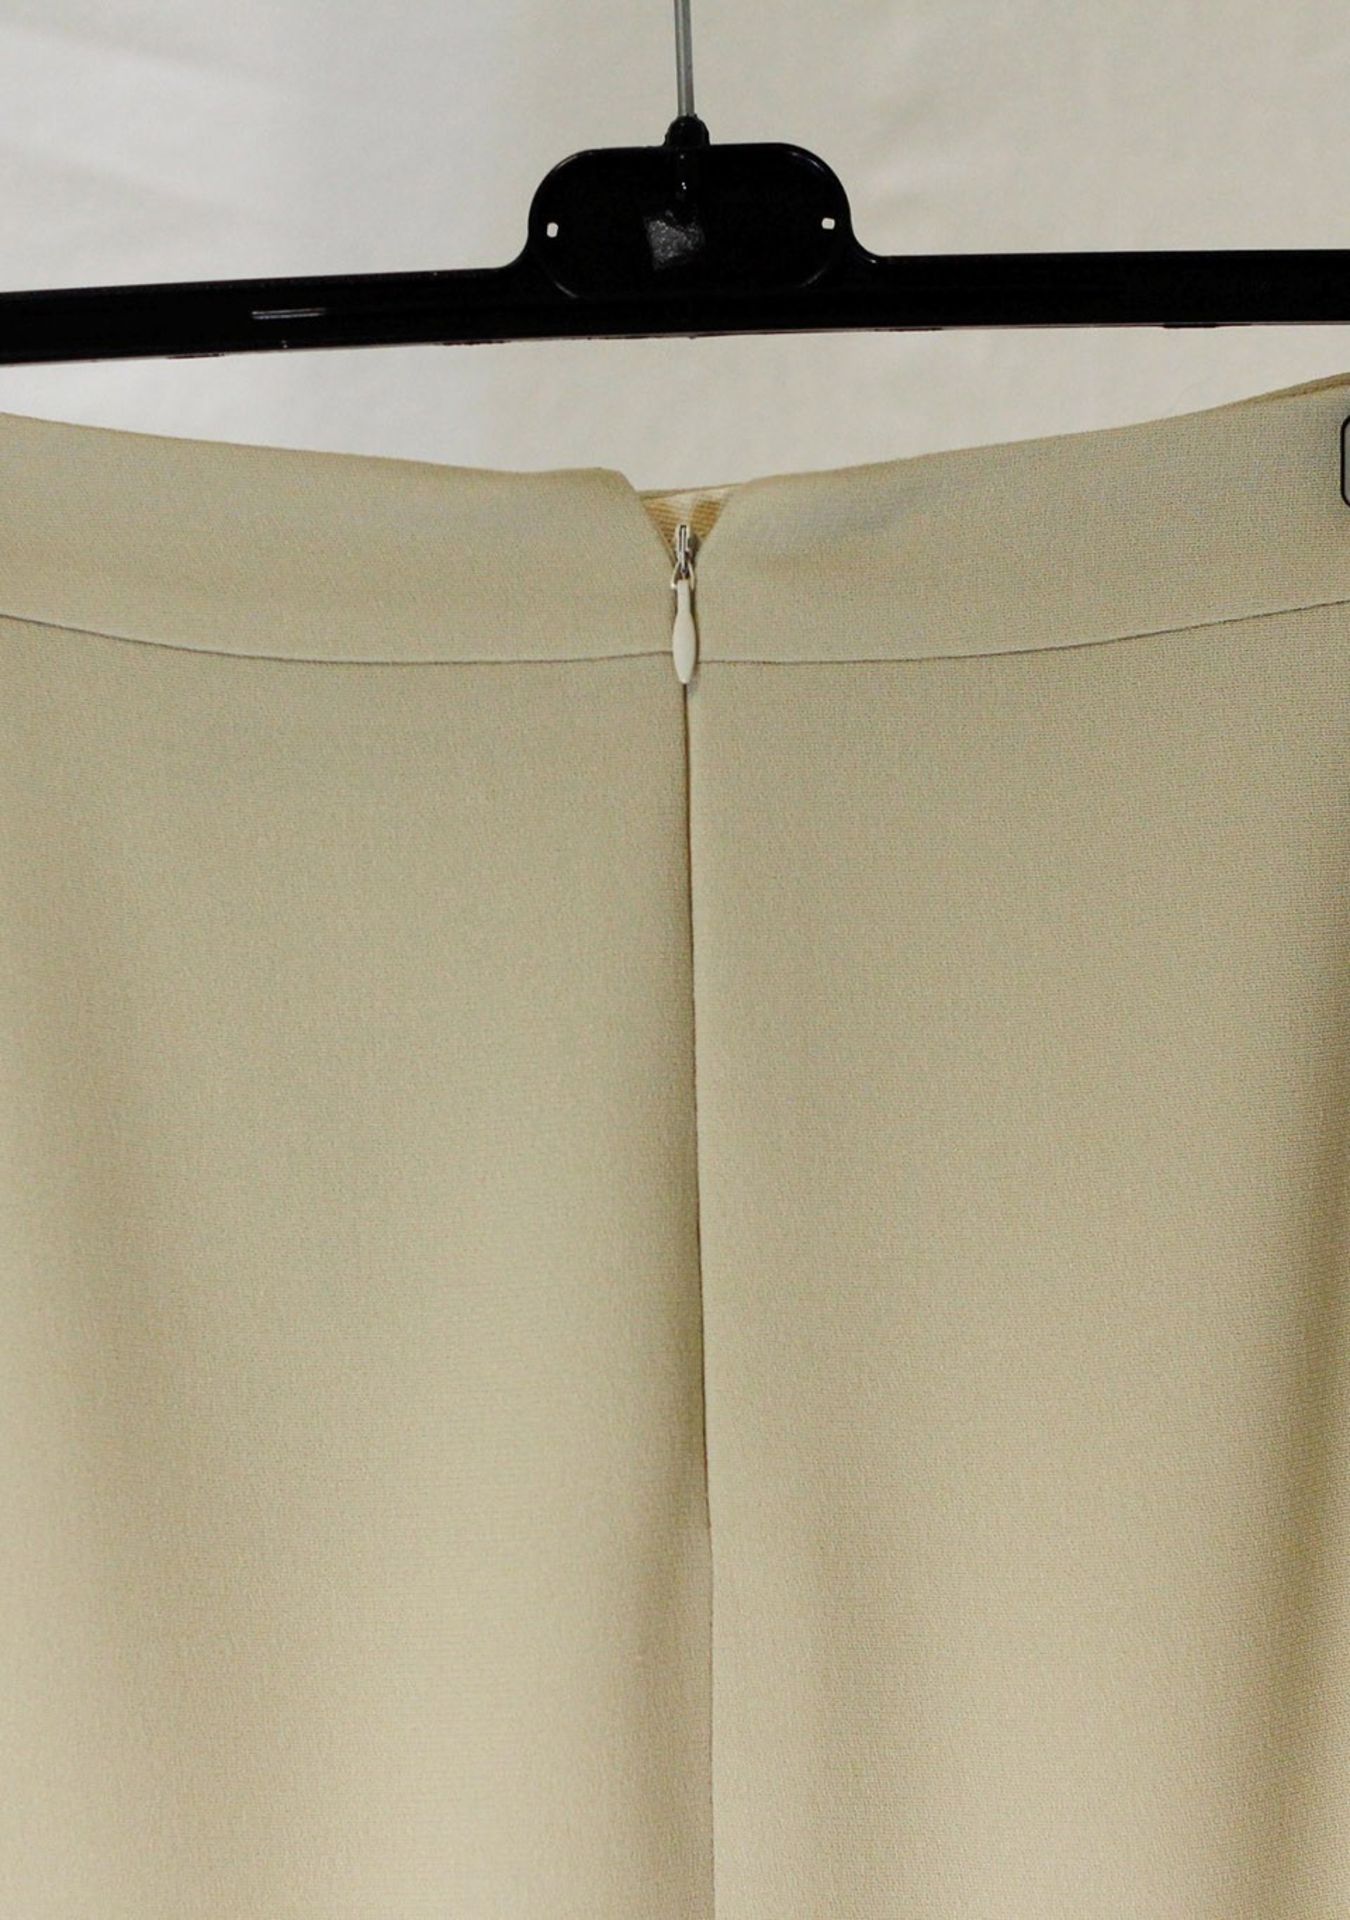 1 x Anne Belin Pistachio Skirt - Size: 20 - Material: 100% Polyester - From a High End Clothing - Image 10 of 12